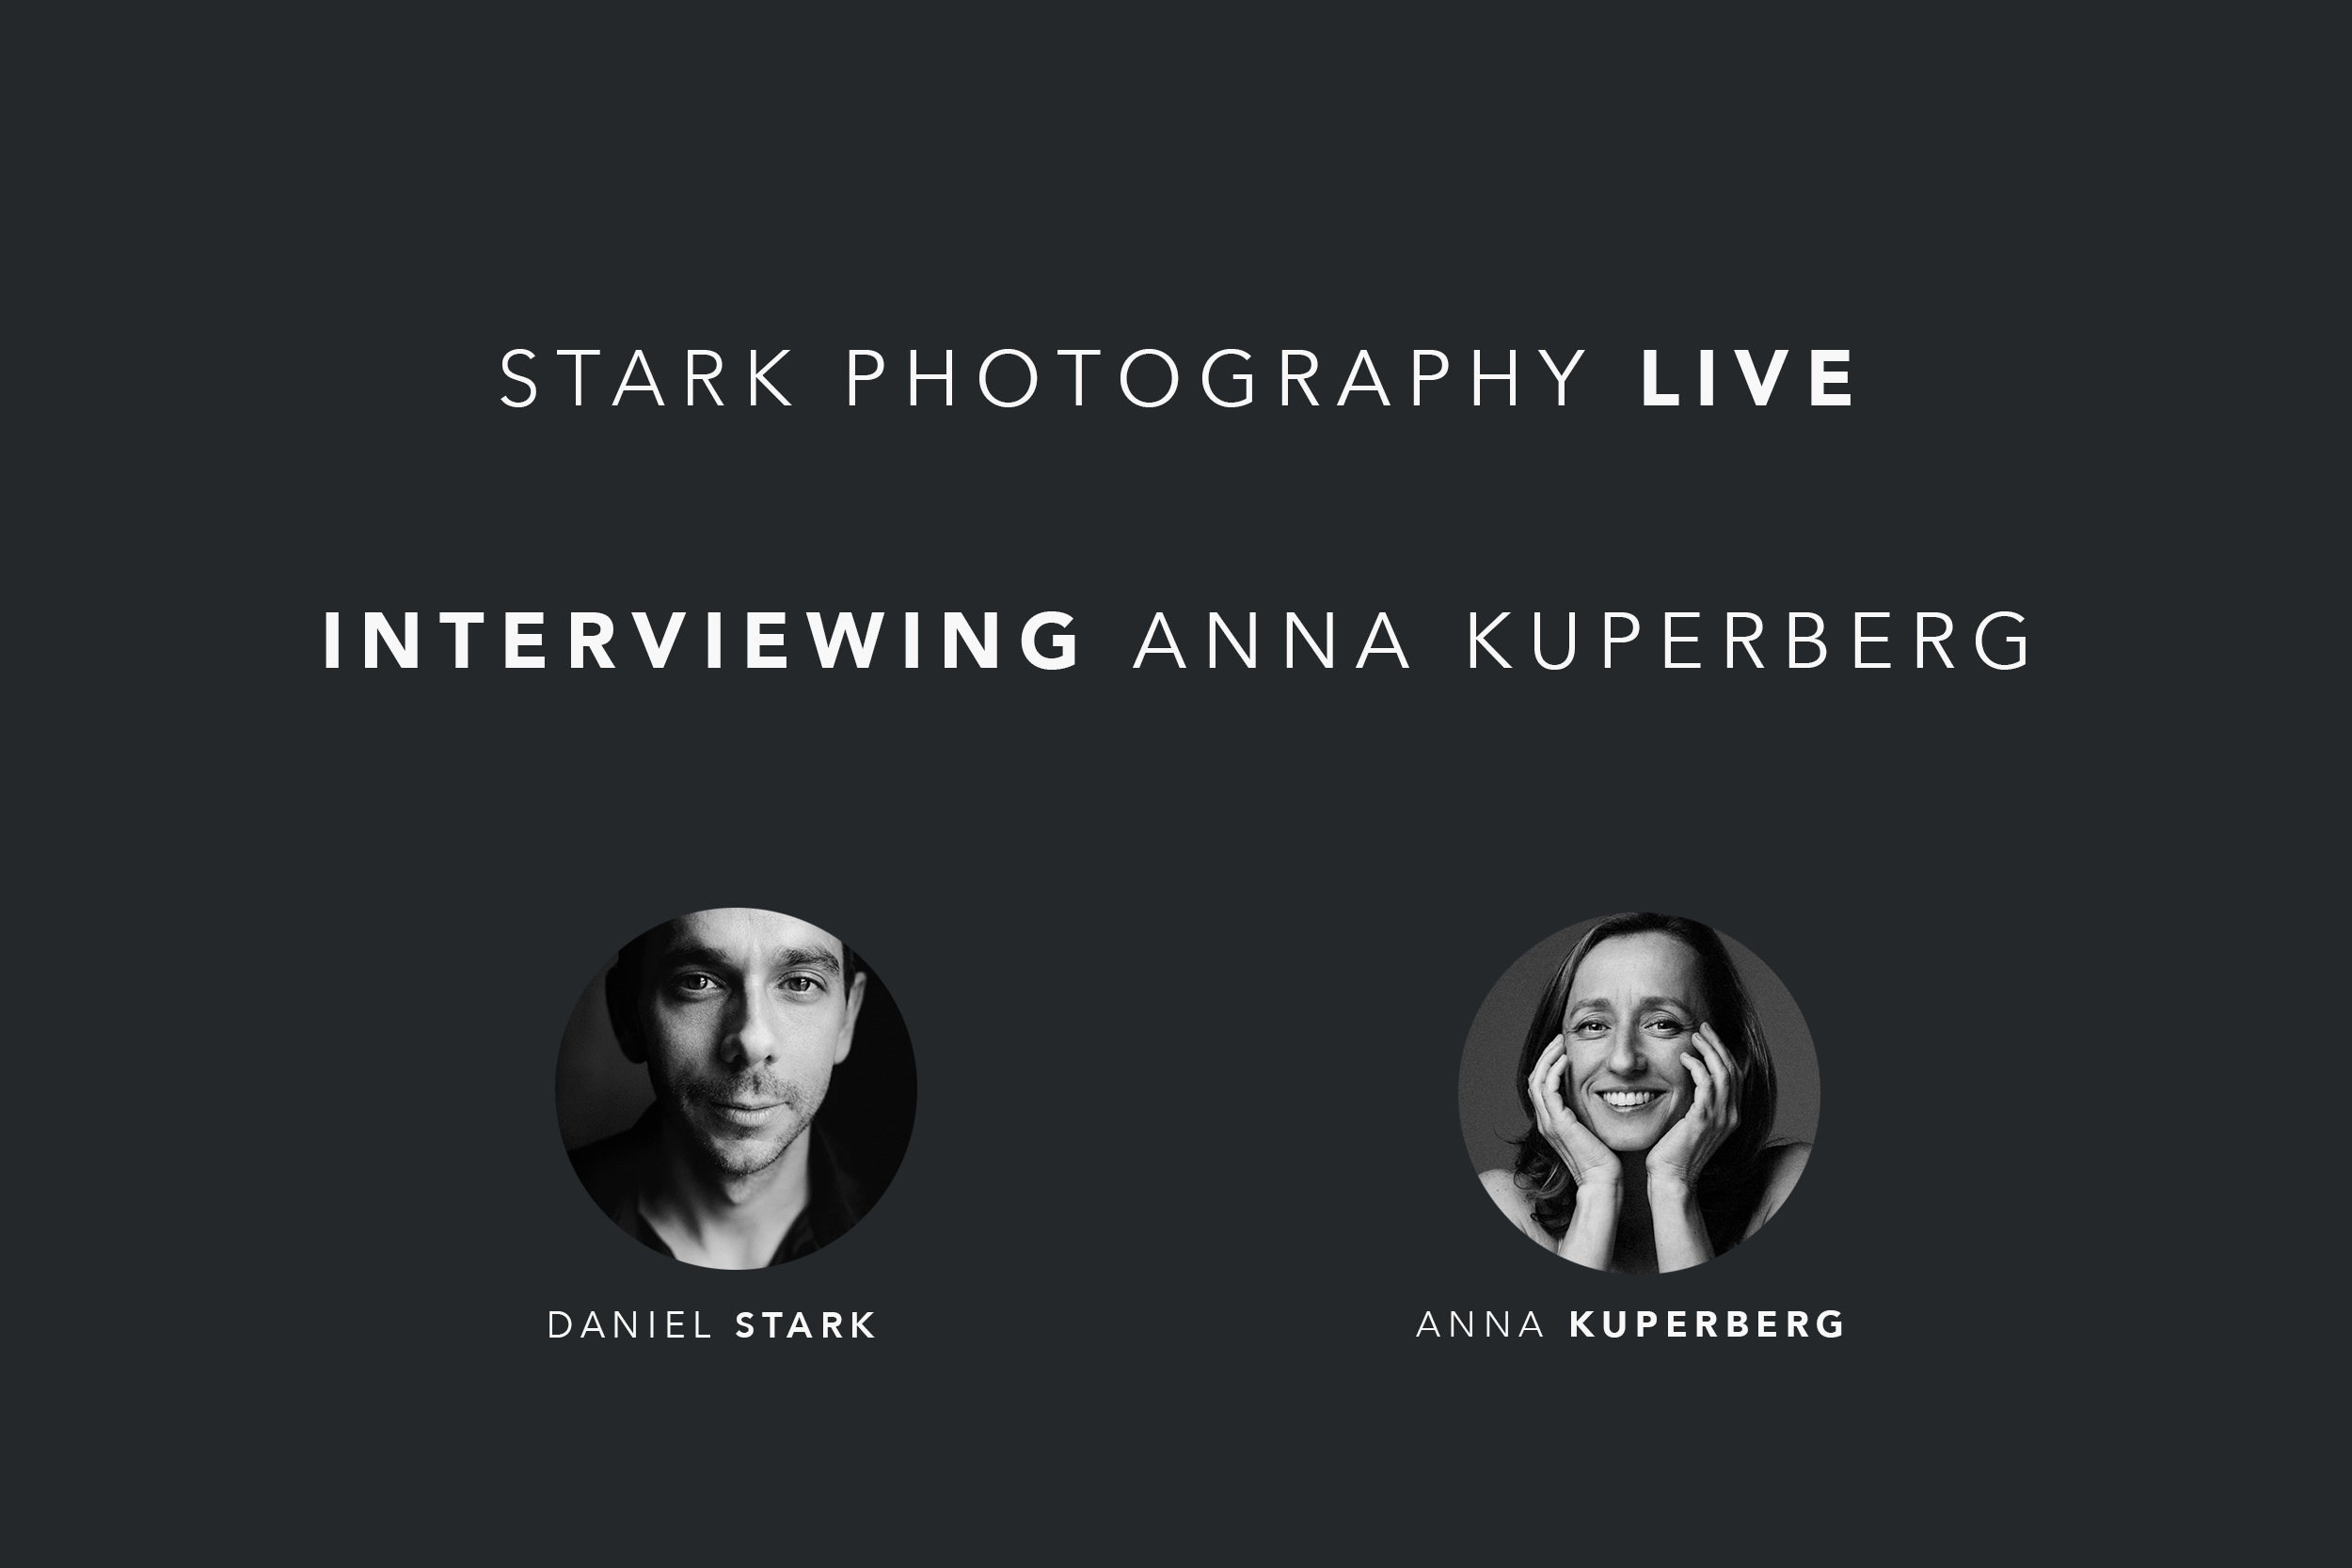 Facebook live interview with Anna Kuperberg, San Francisco based wedding and portrait photographer